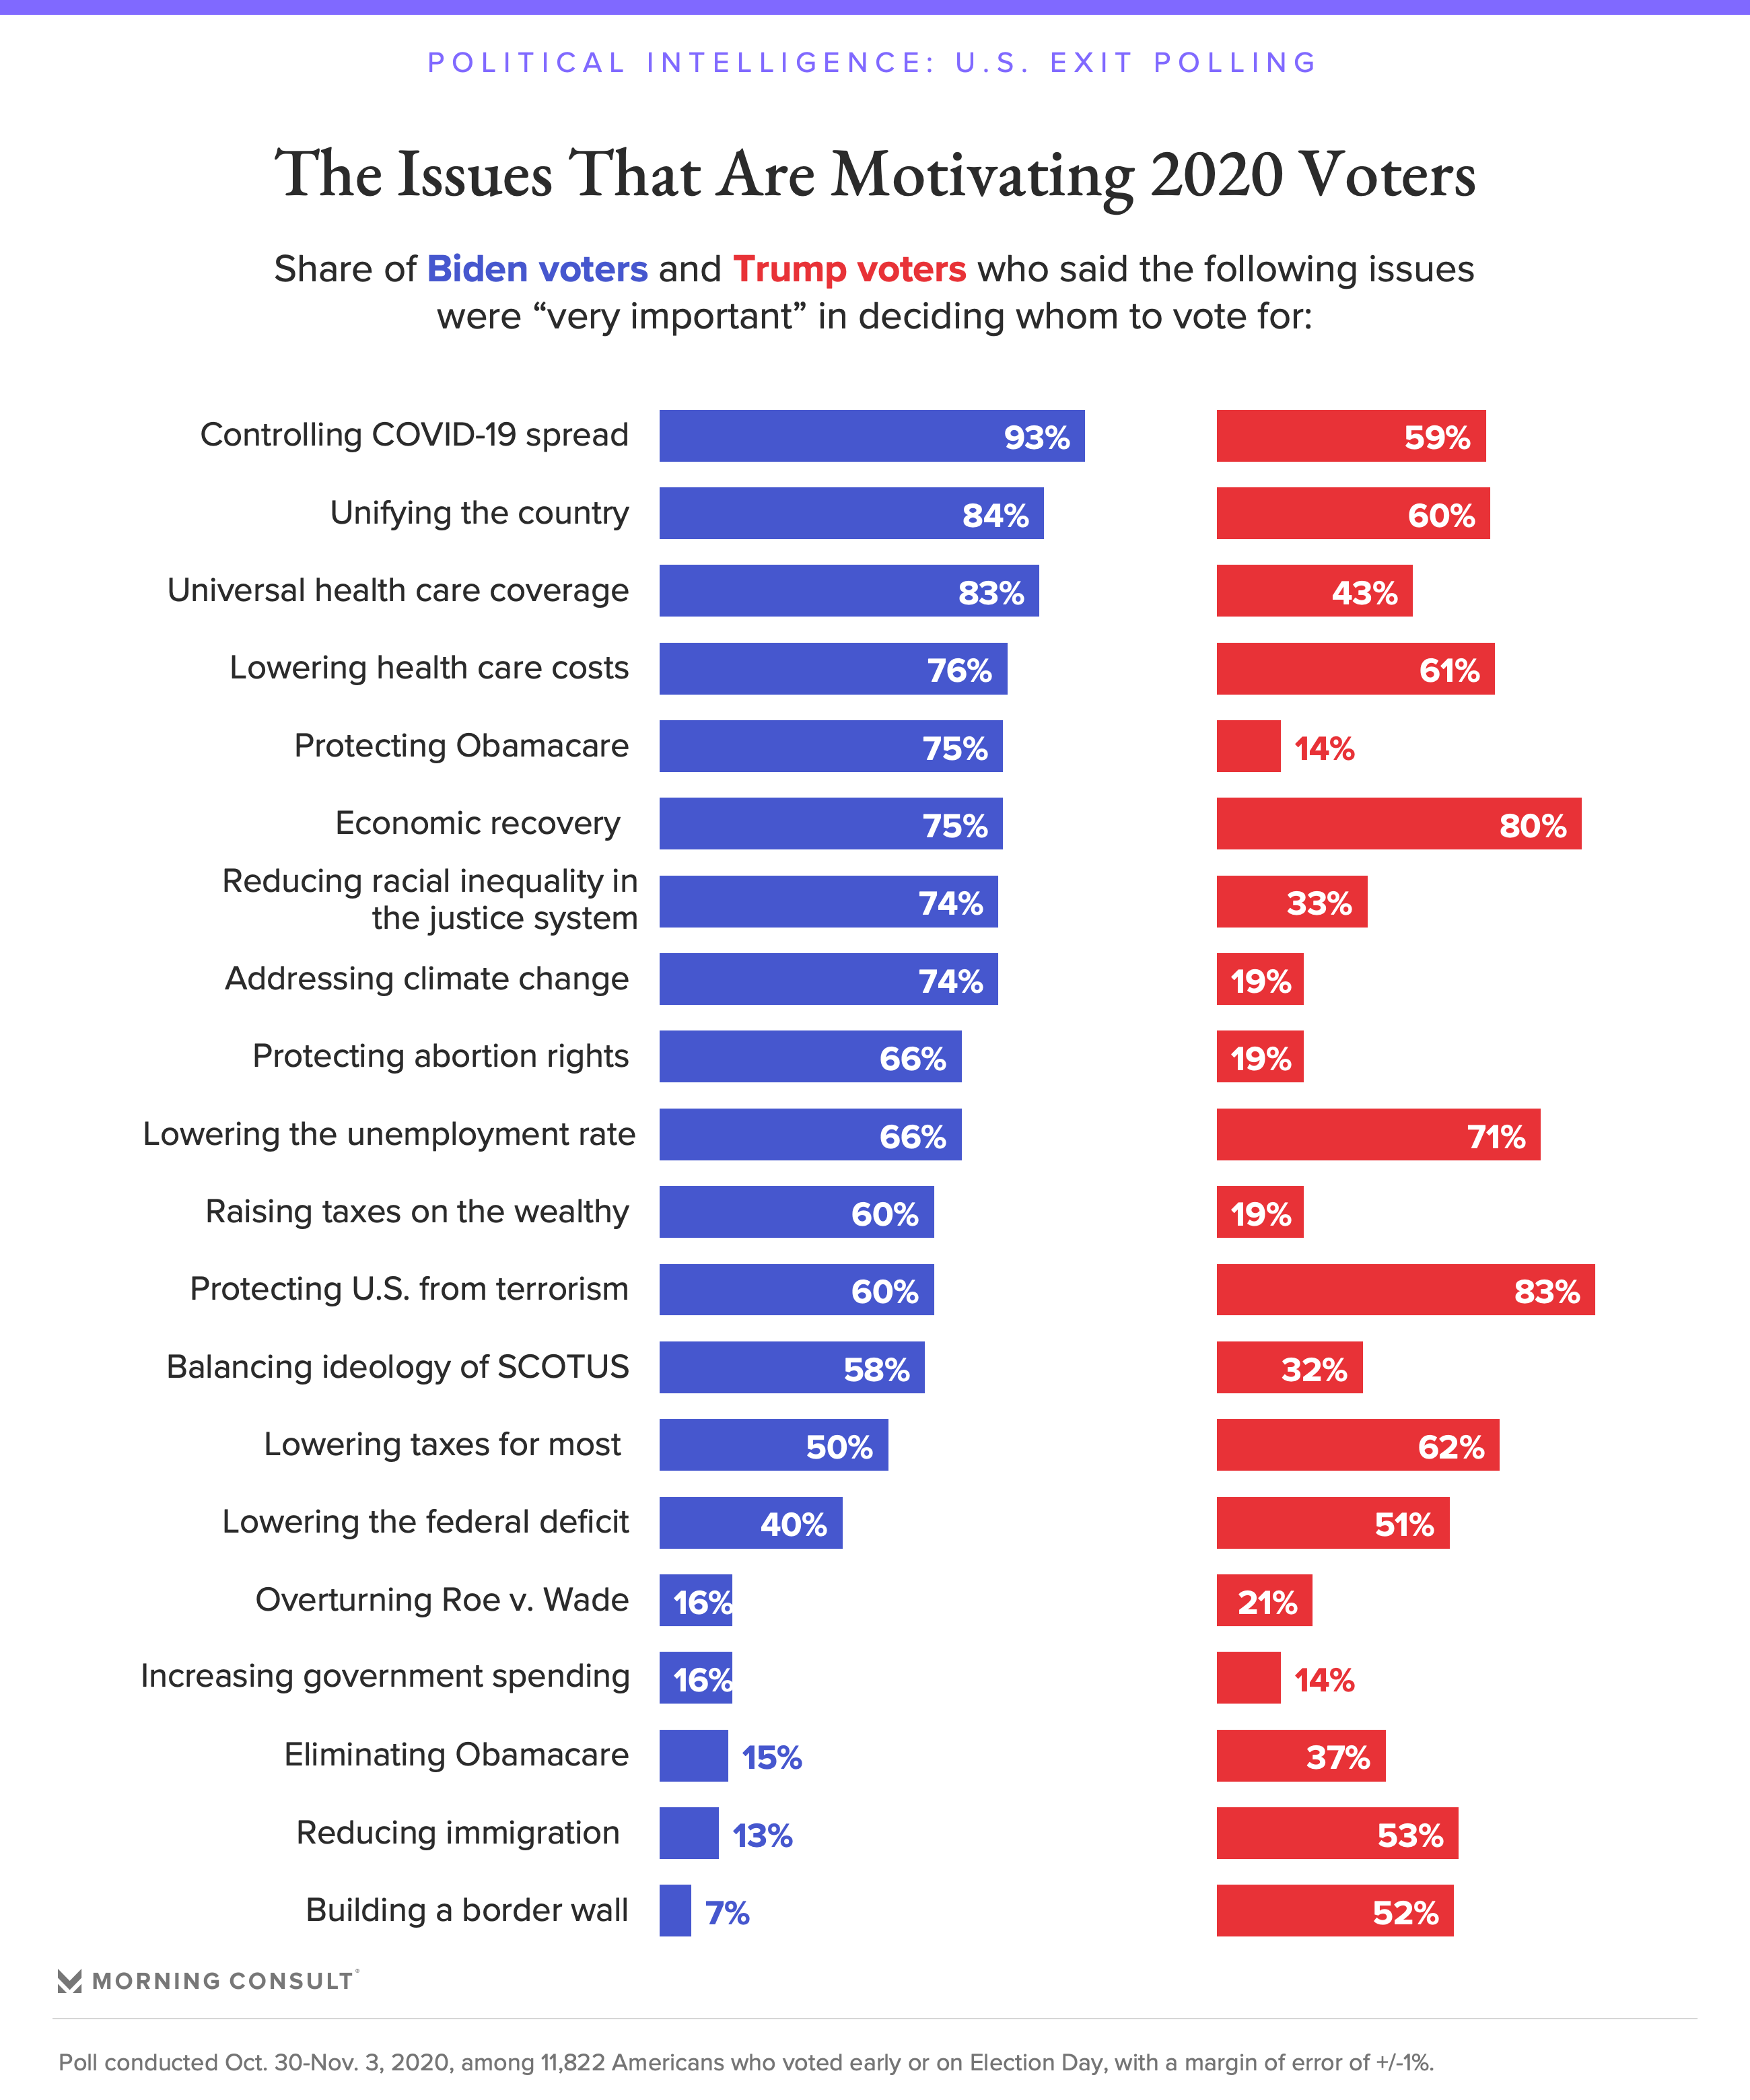 201103_Exit-Polling-Top-Issues-FULLWIDTH